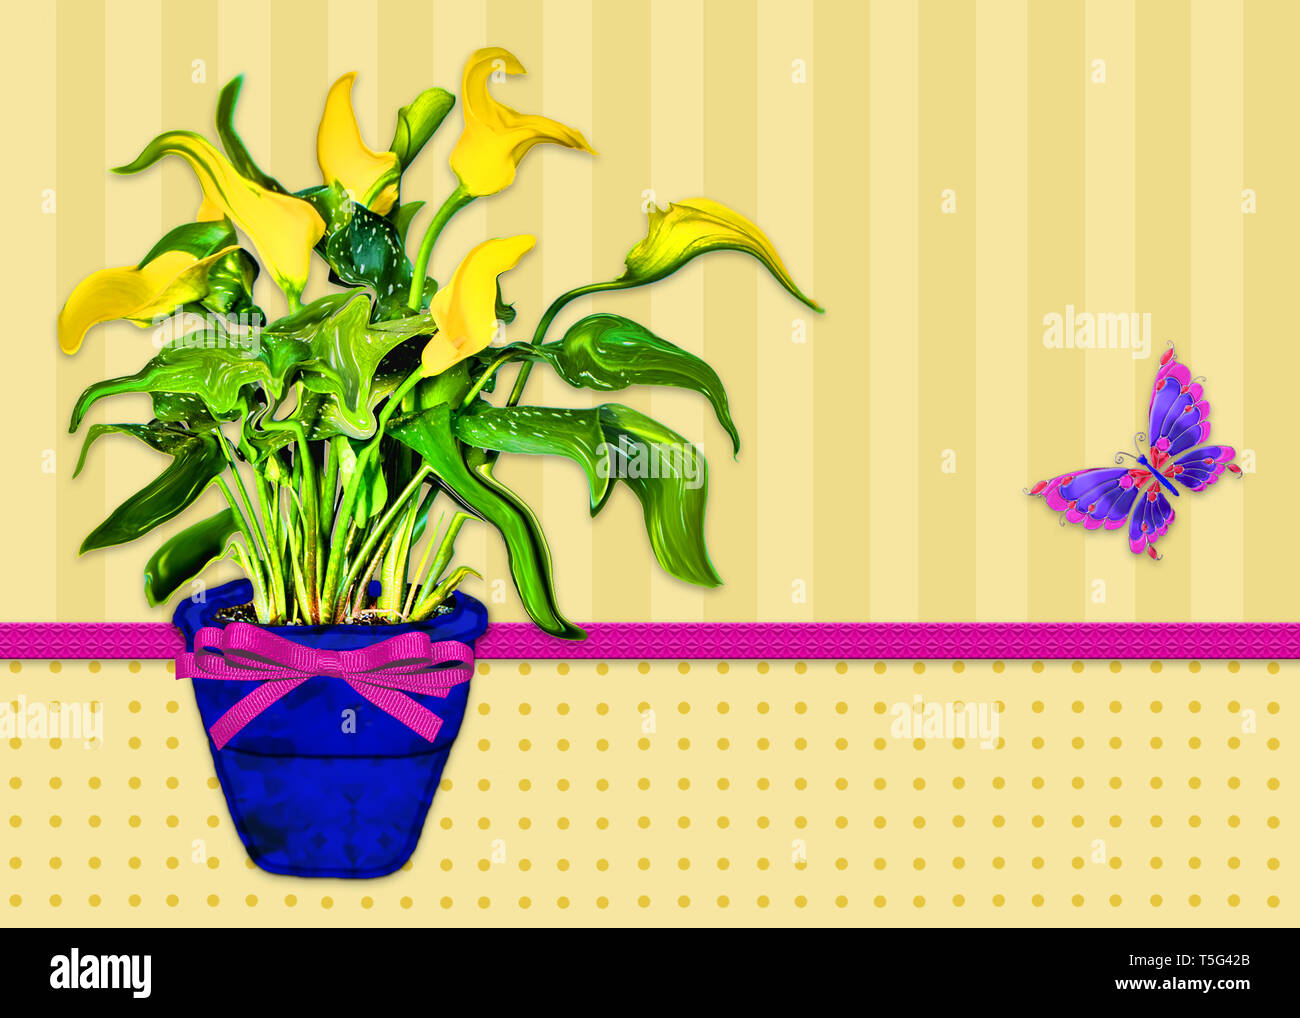 Fun Abstract Graphic Illustration of bright yellow Calla Lilies with background in stripes and polka dots.  Faux fuchsia ribbon/bow and butterfly. Stock Photo